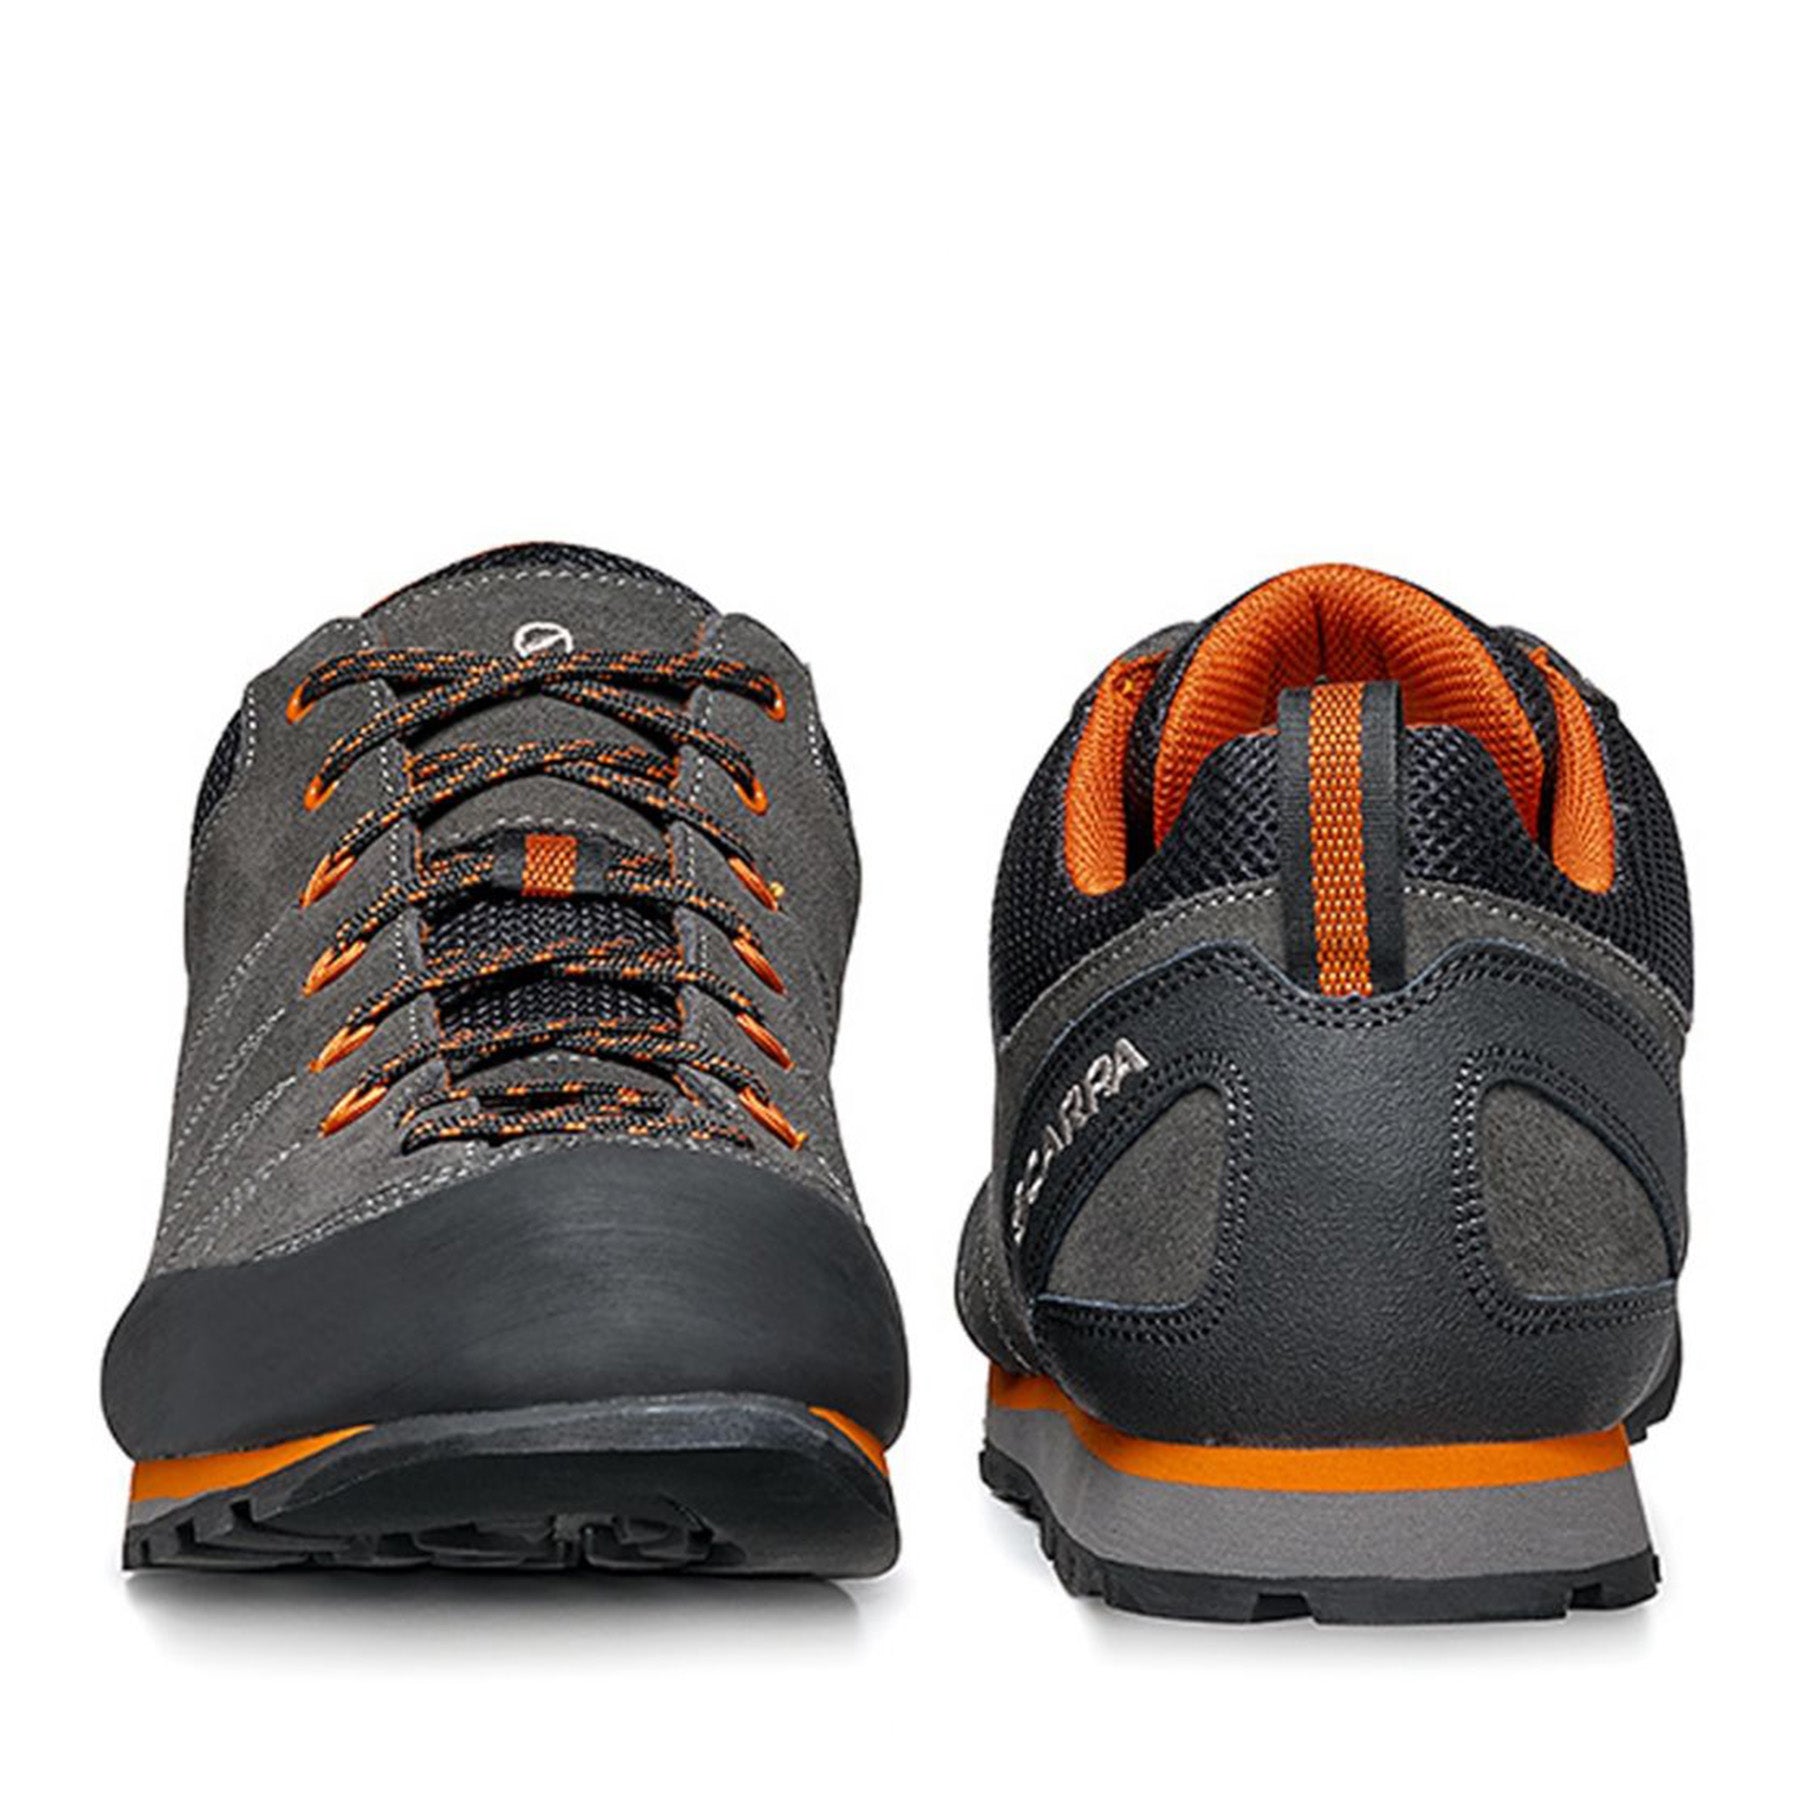 a pair of men's crux approach shoes with one facing us and the other facing away